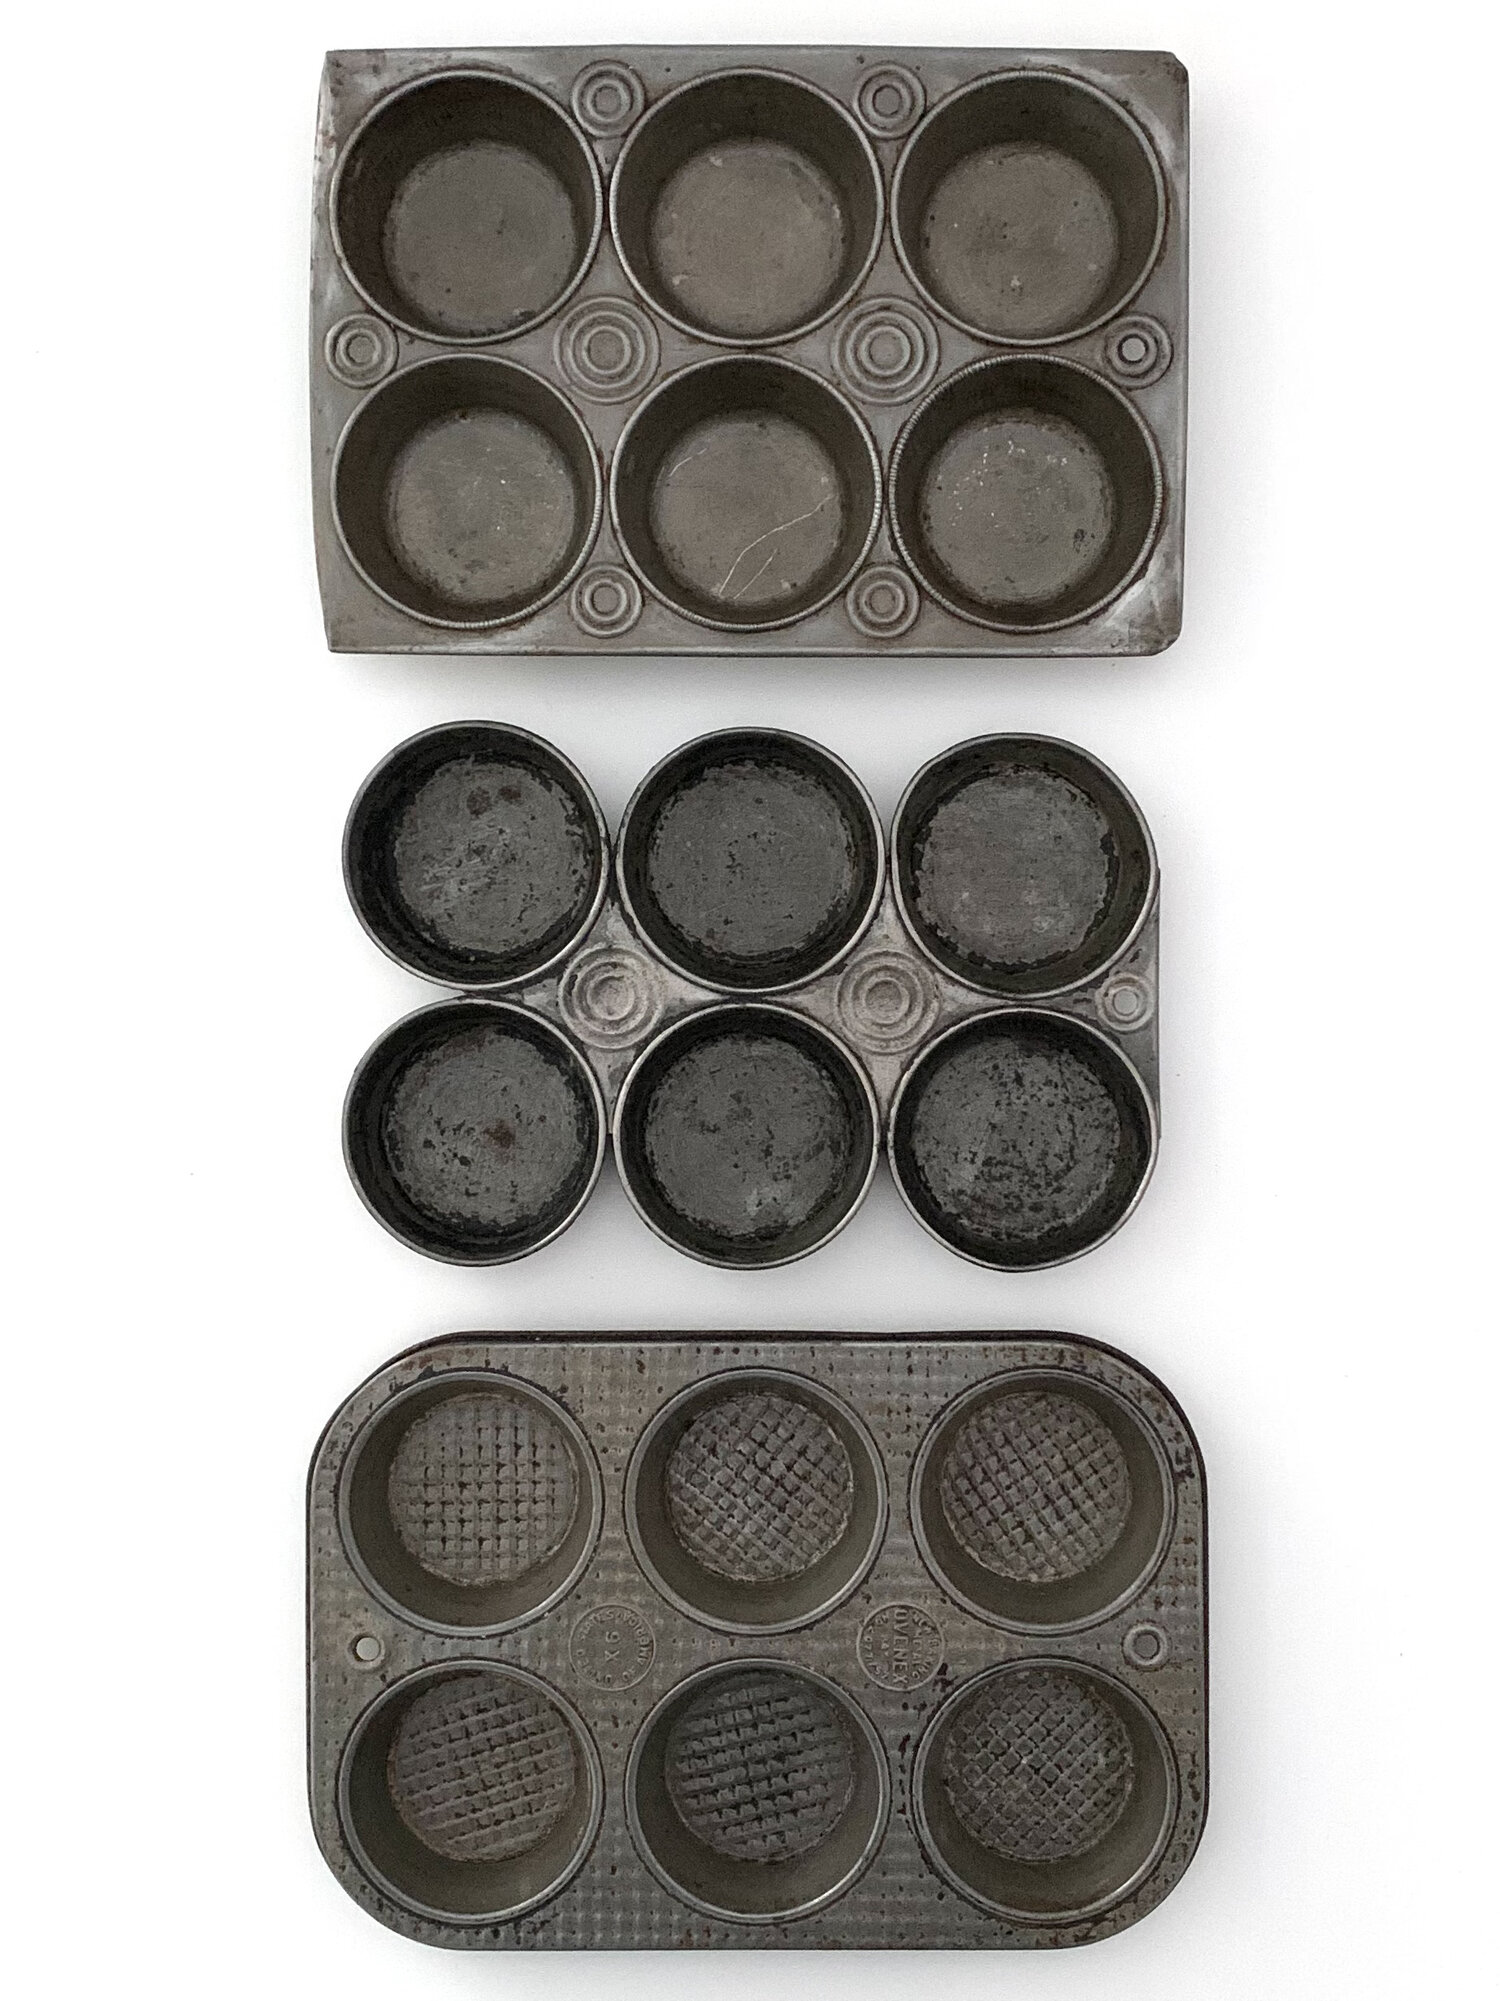 Vintage Muffin Pan, Vintage Muffin Tin, 12 Cup Muffin Pan